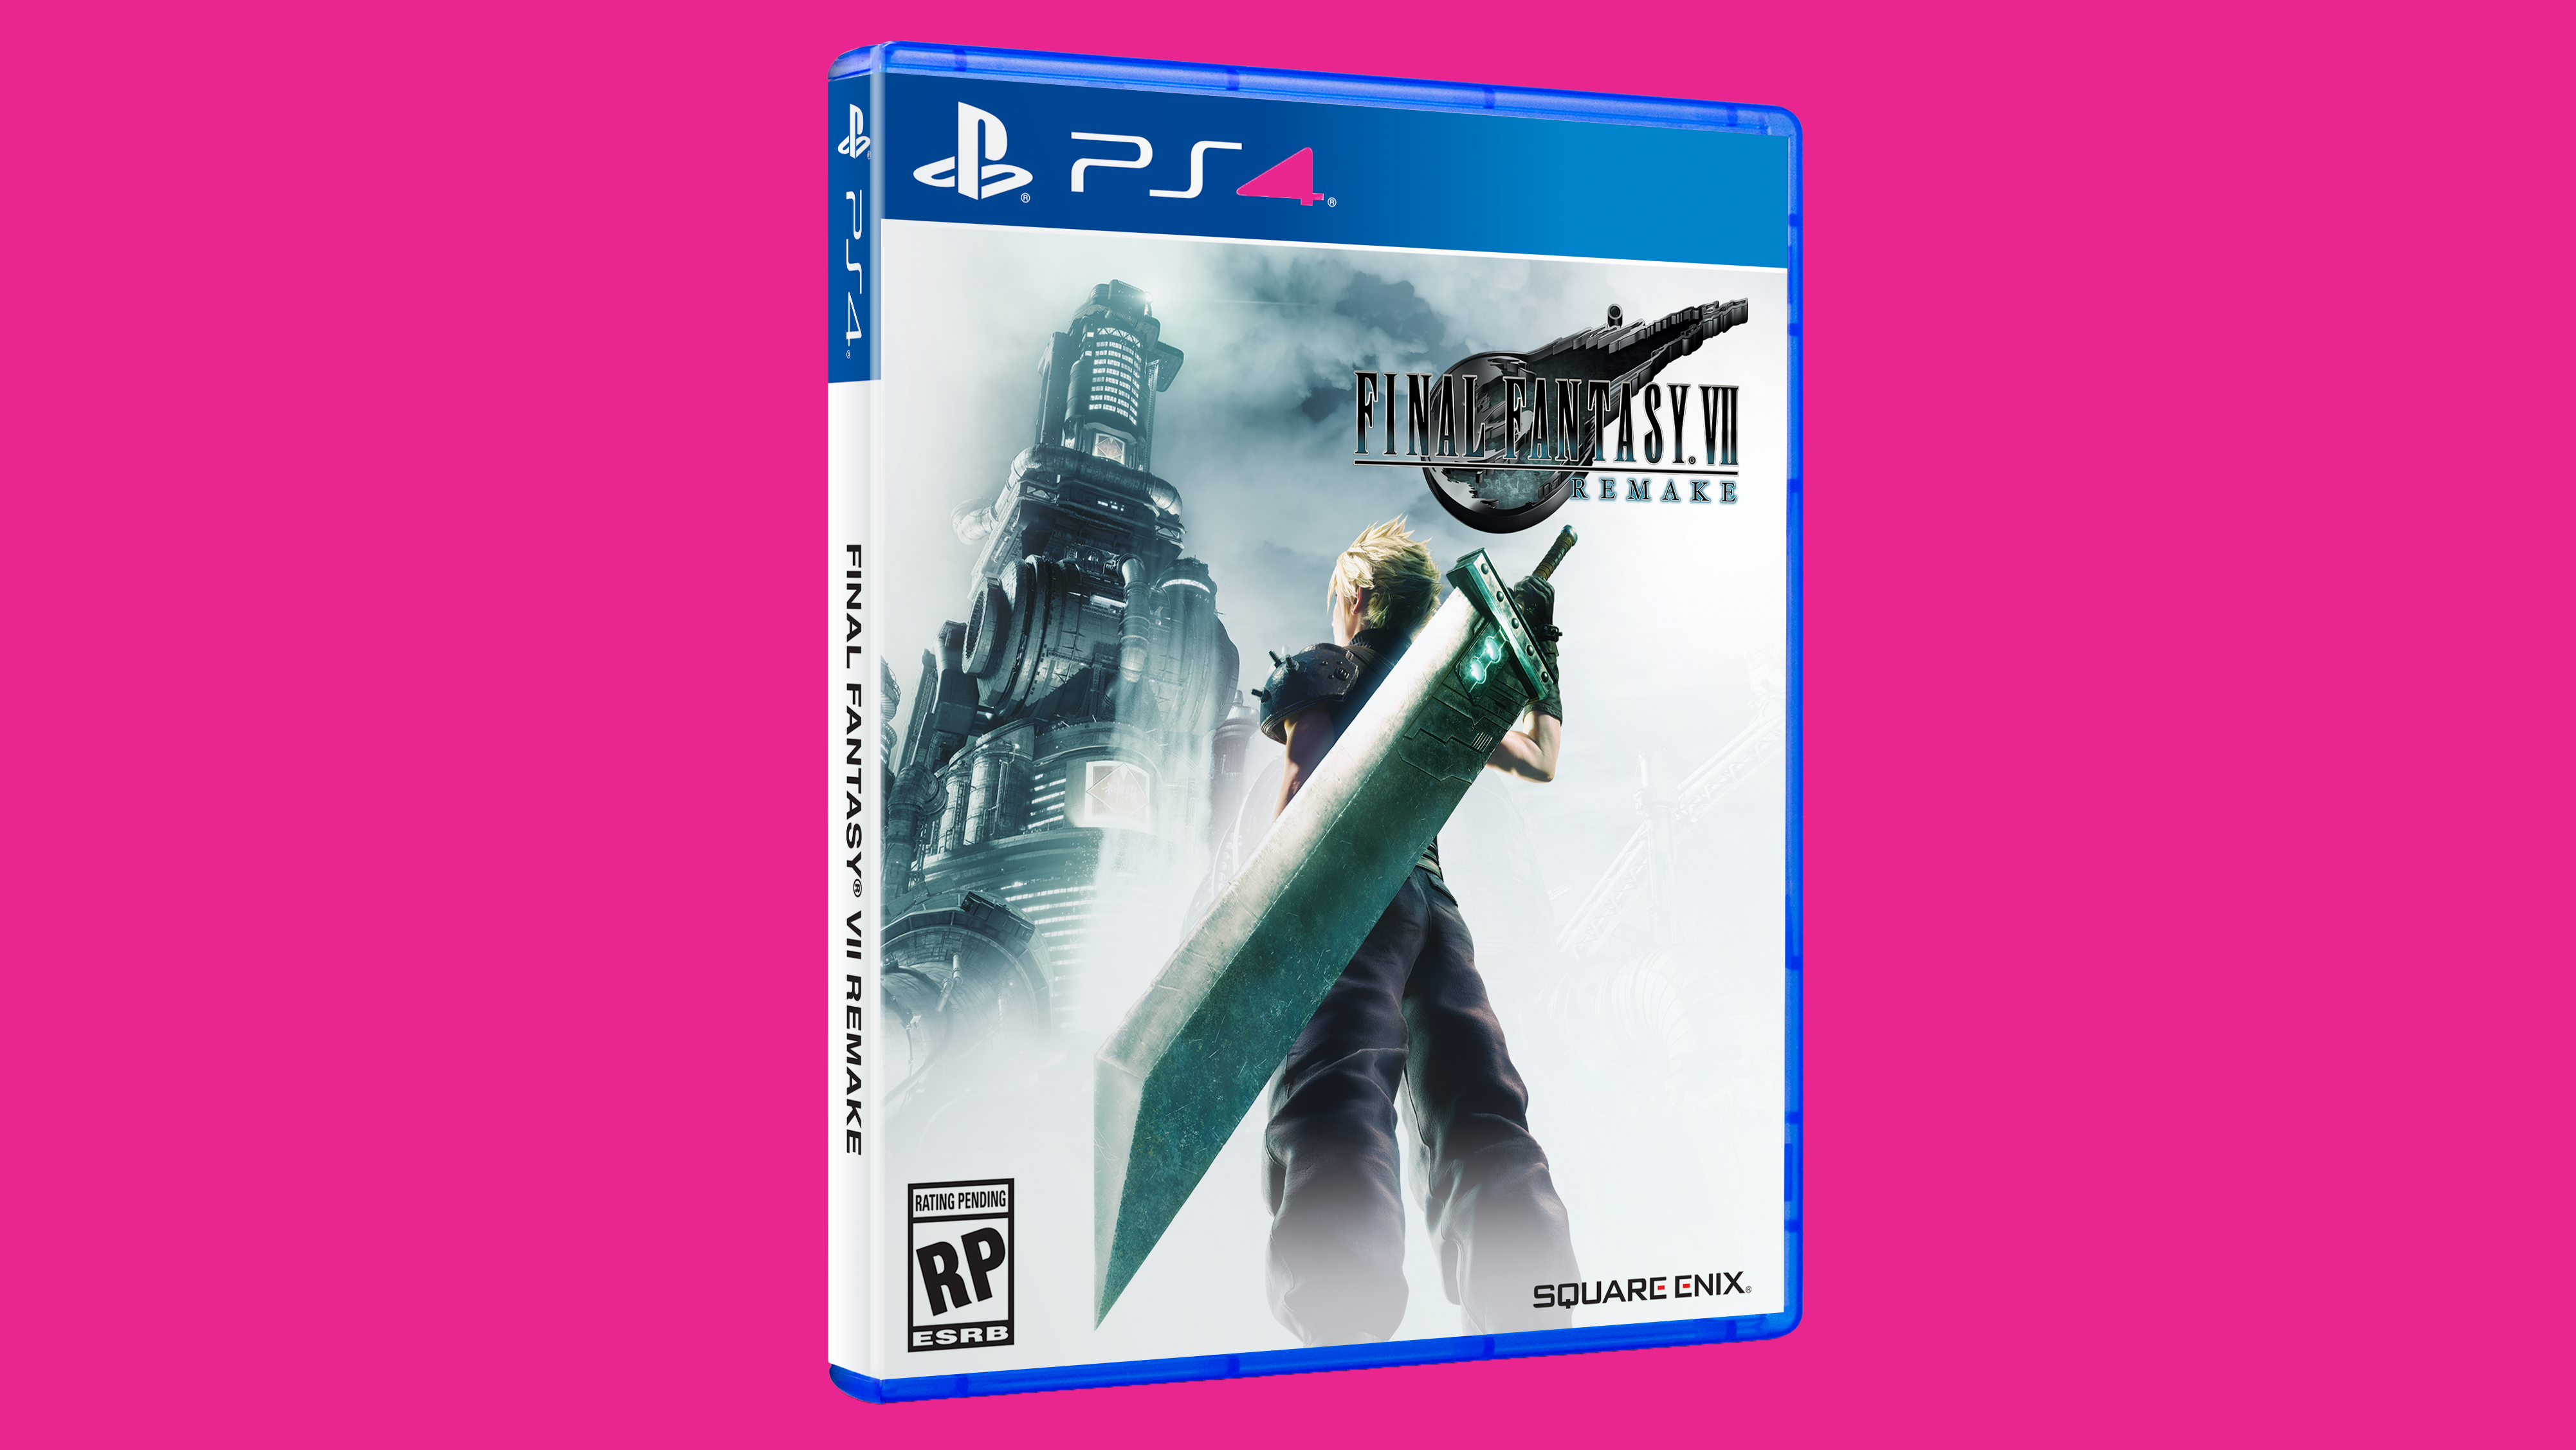 It’s Not Gonna Happen But I Still Want A Physical Copy Of Final Fantasy VII Remake